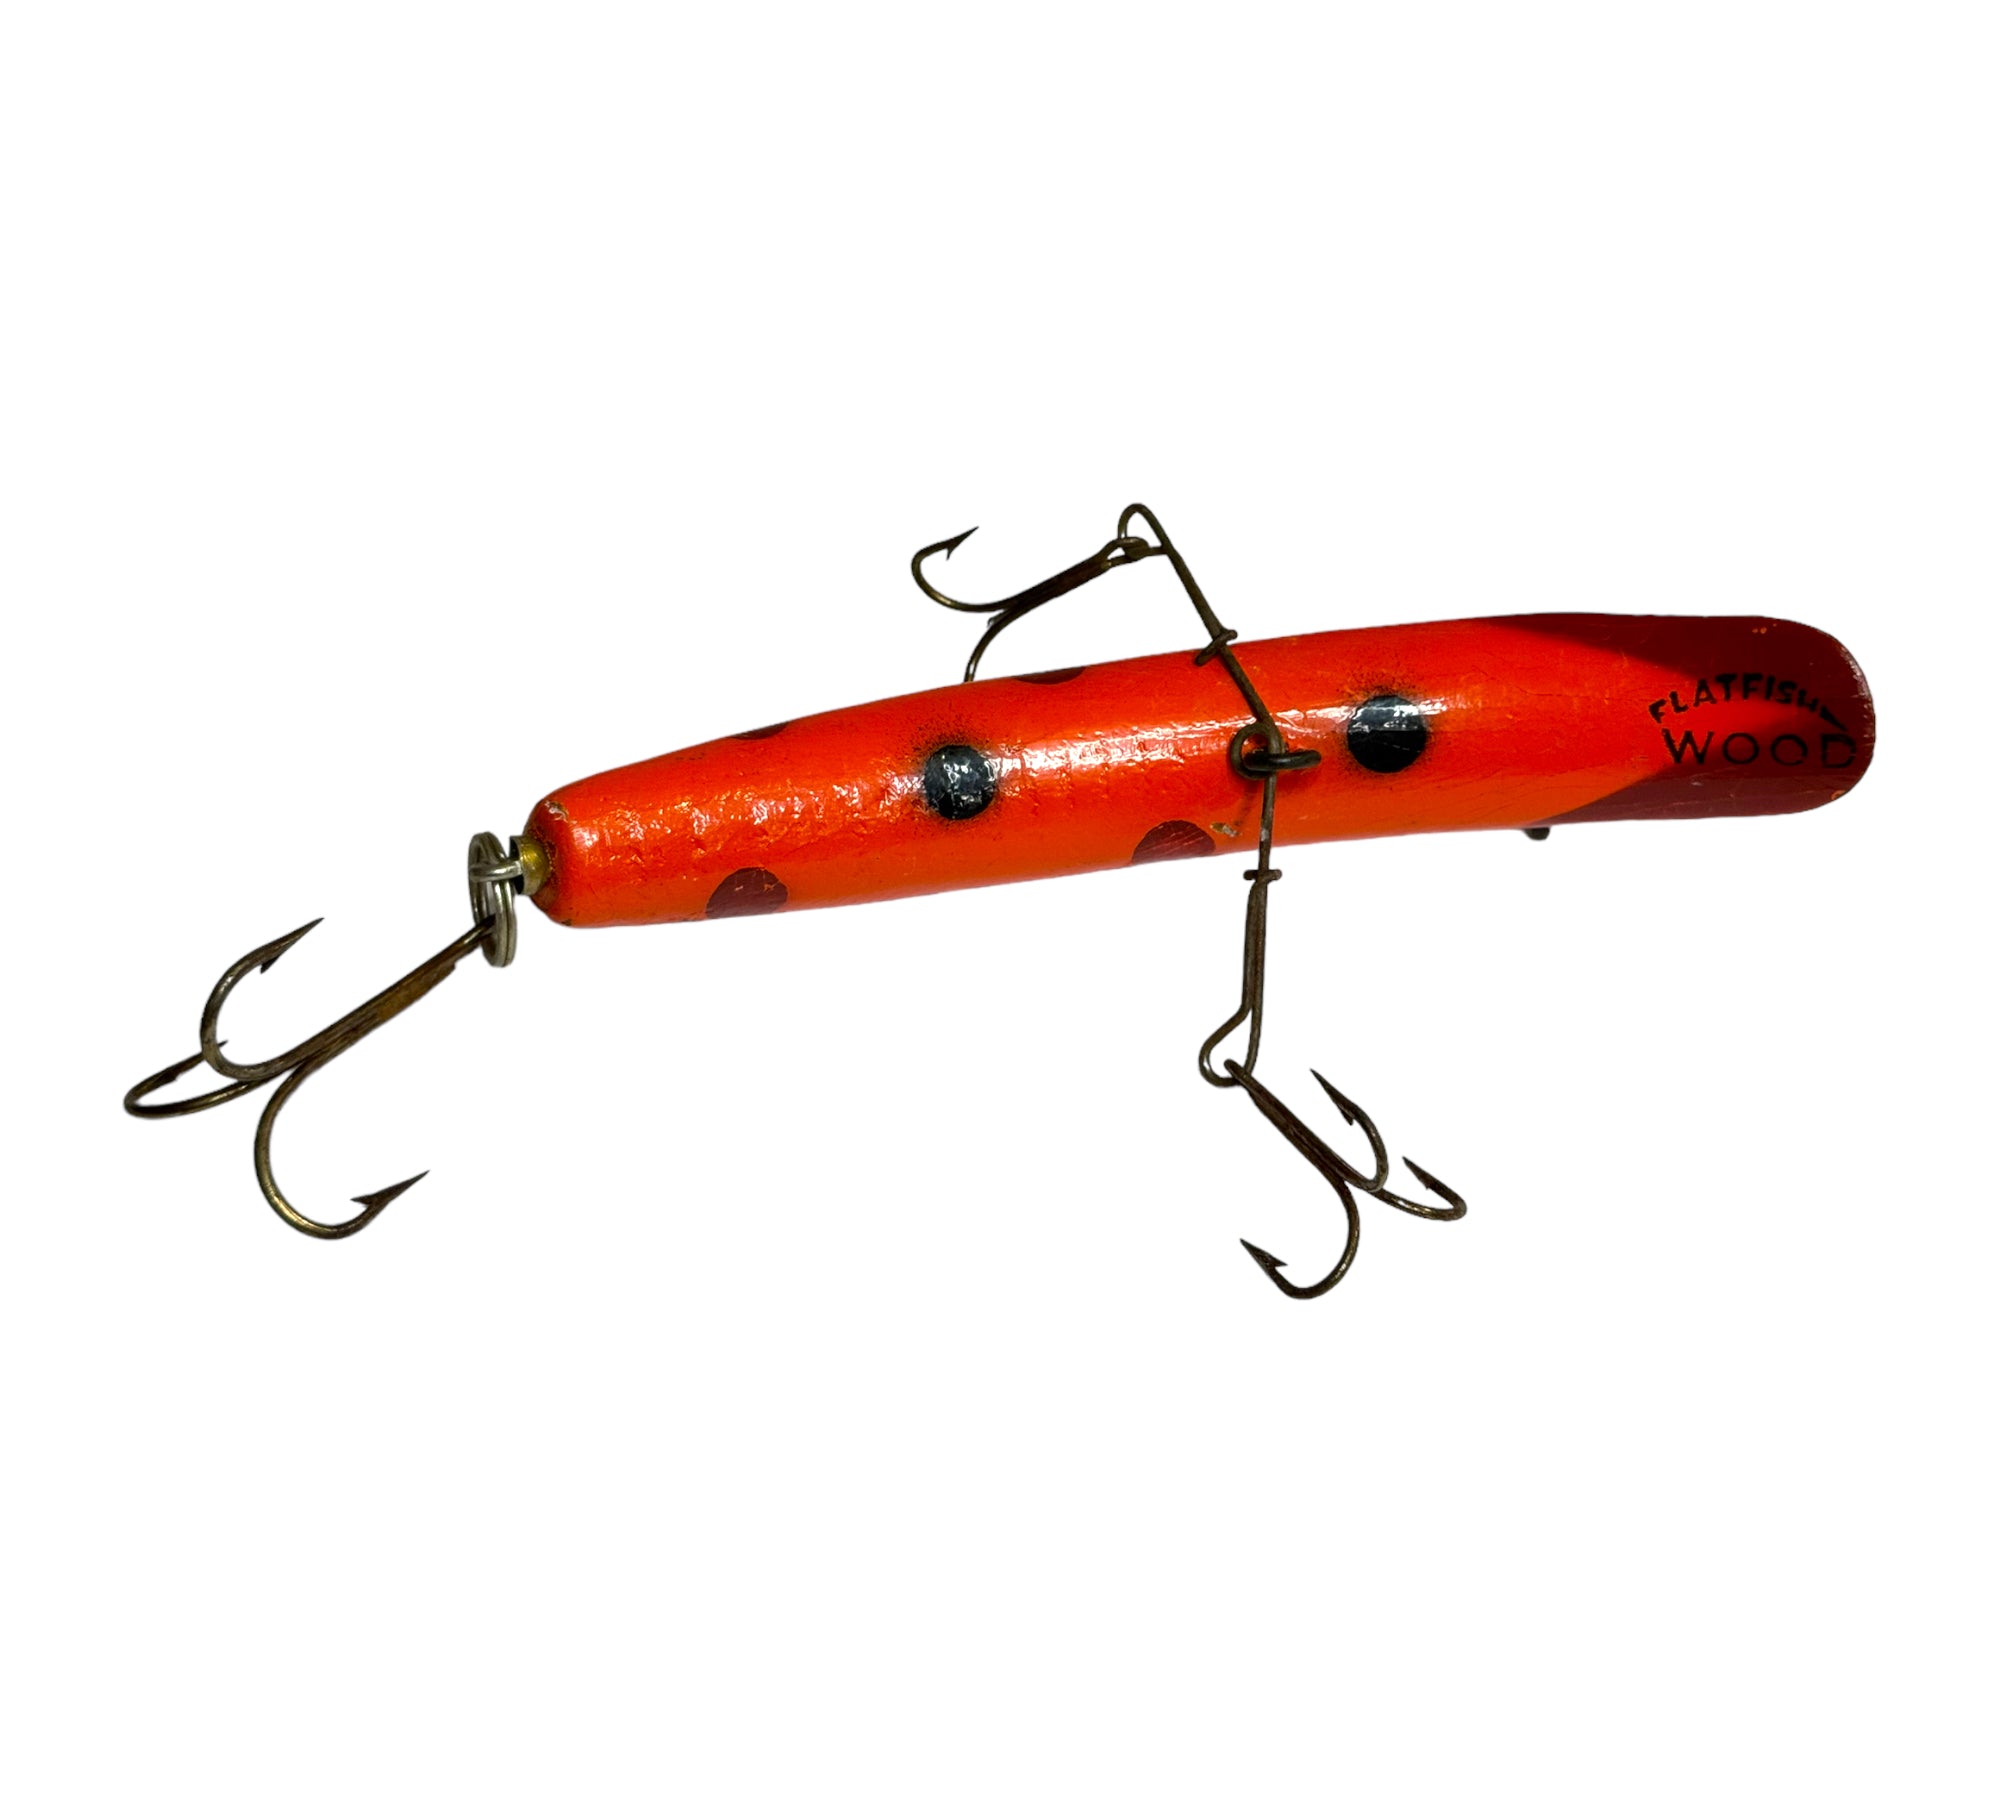 Wooden 7 1/4 Wood Chopper fishing lure missing the line tie - AAA Auction  and Realty